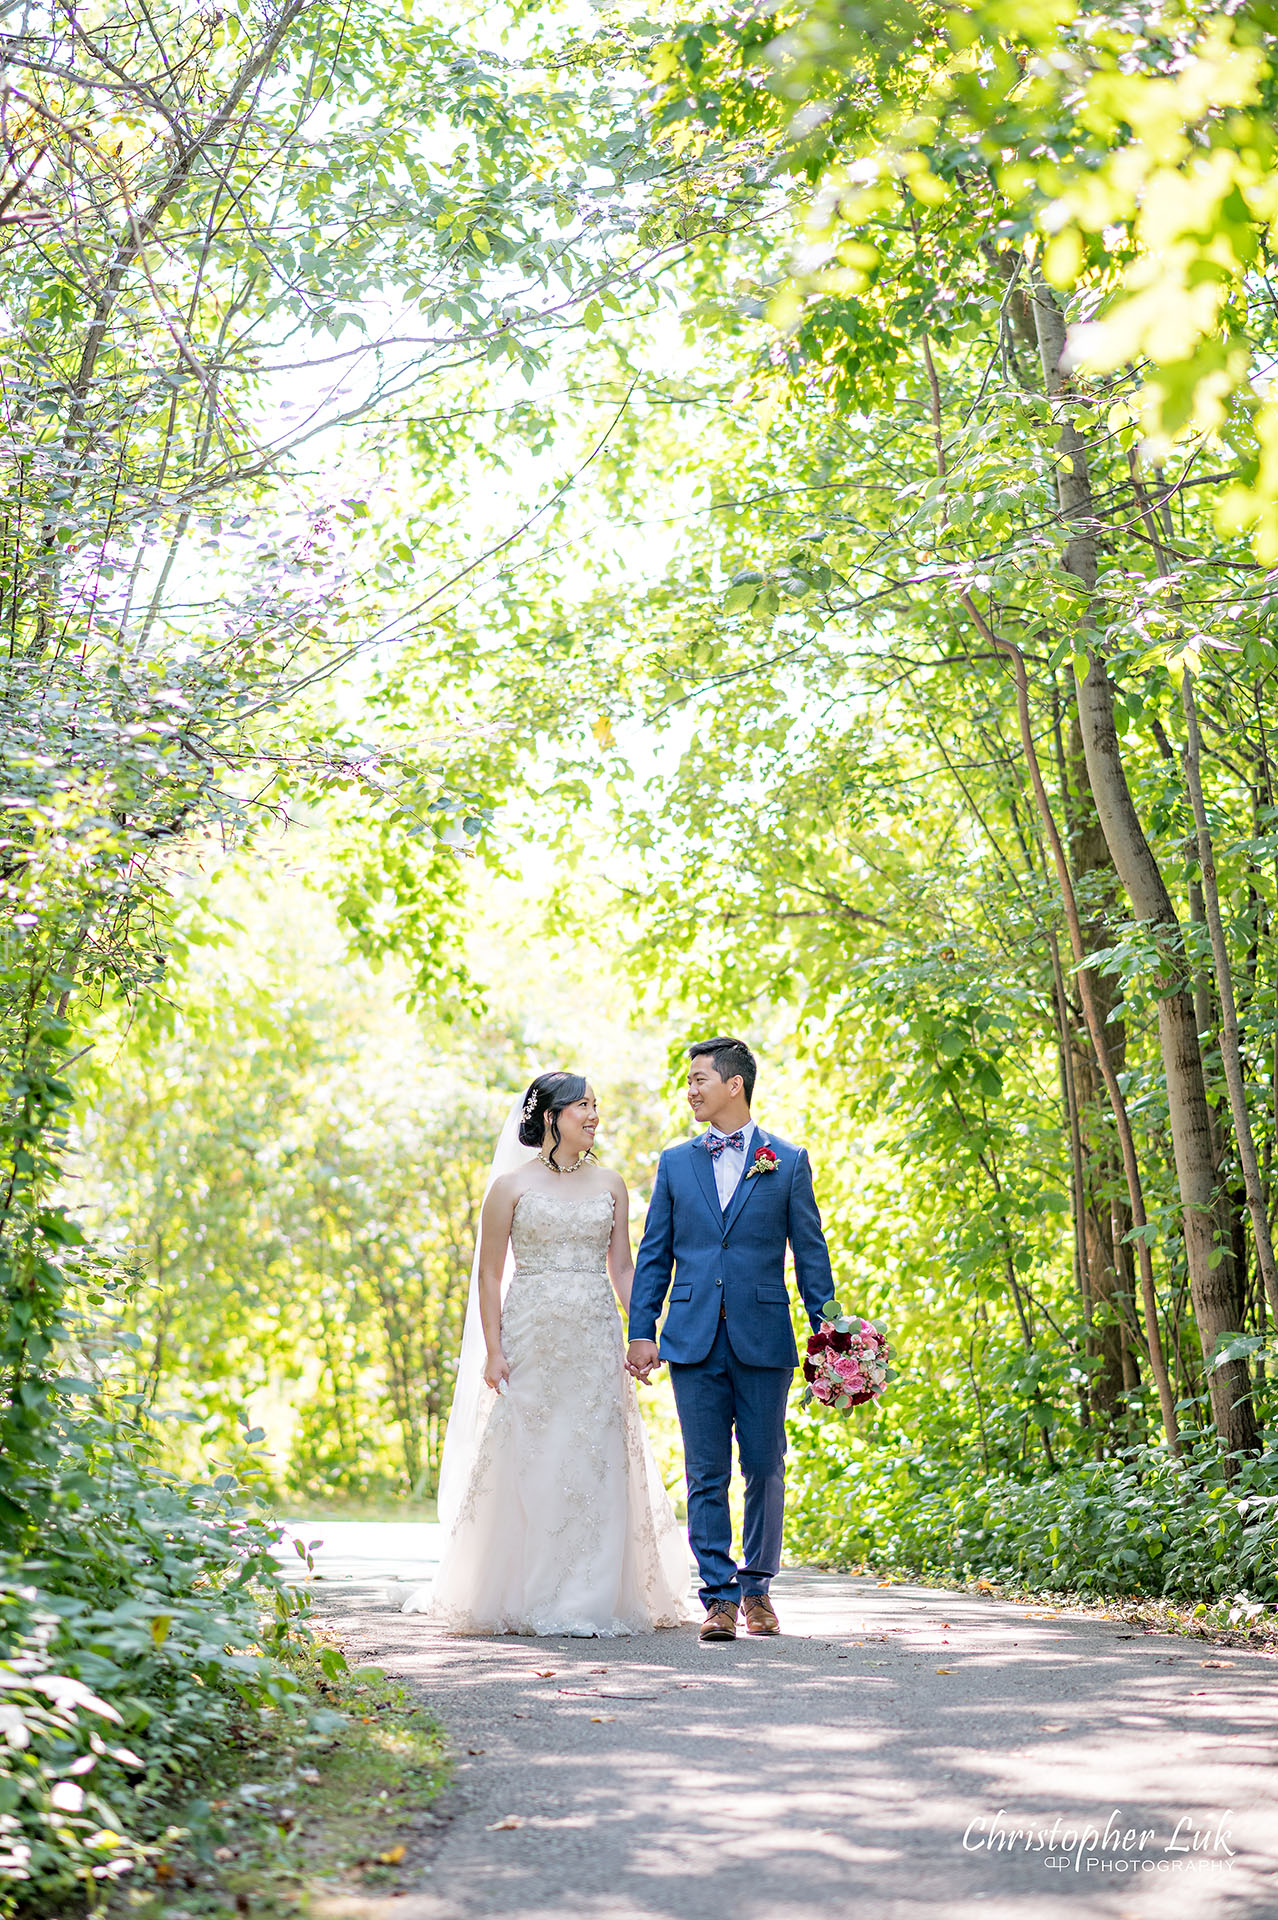 Christopher Luk Toronto Wedding Photographer Bridle Trail Baptist Church Unionville Main Street Crystal Fountain Event Venue Bride Groom Natural Photojournalistic Candid Creative Portrait Session Pictures Holding Hands Walking Together Path Trail Walkway Park Forest